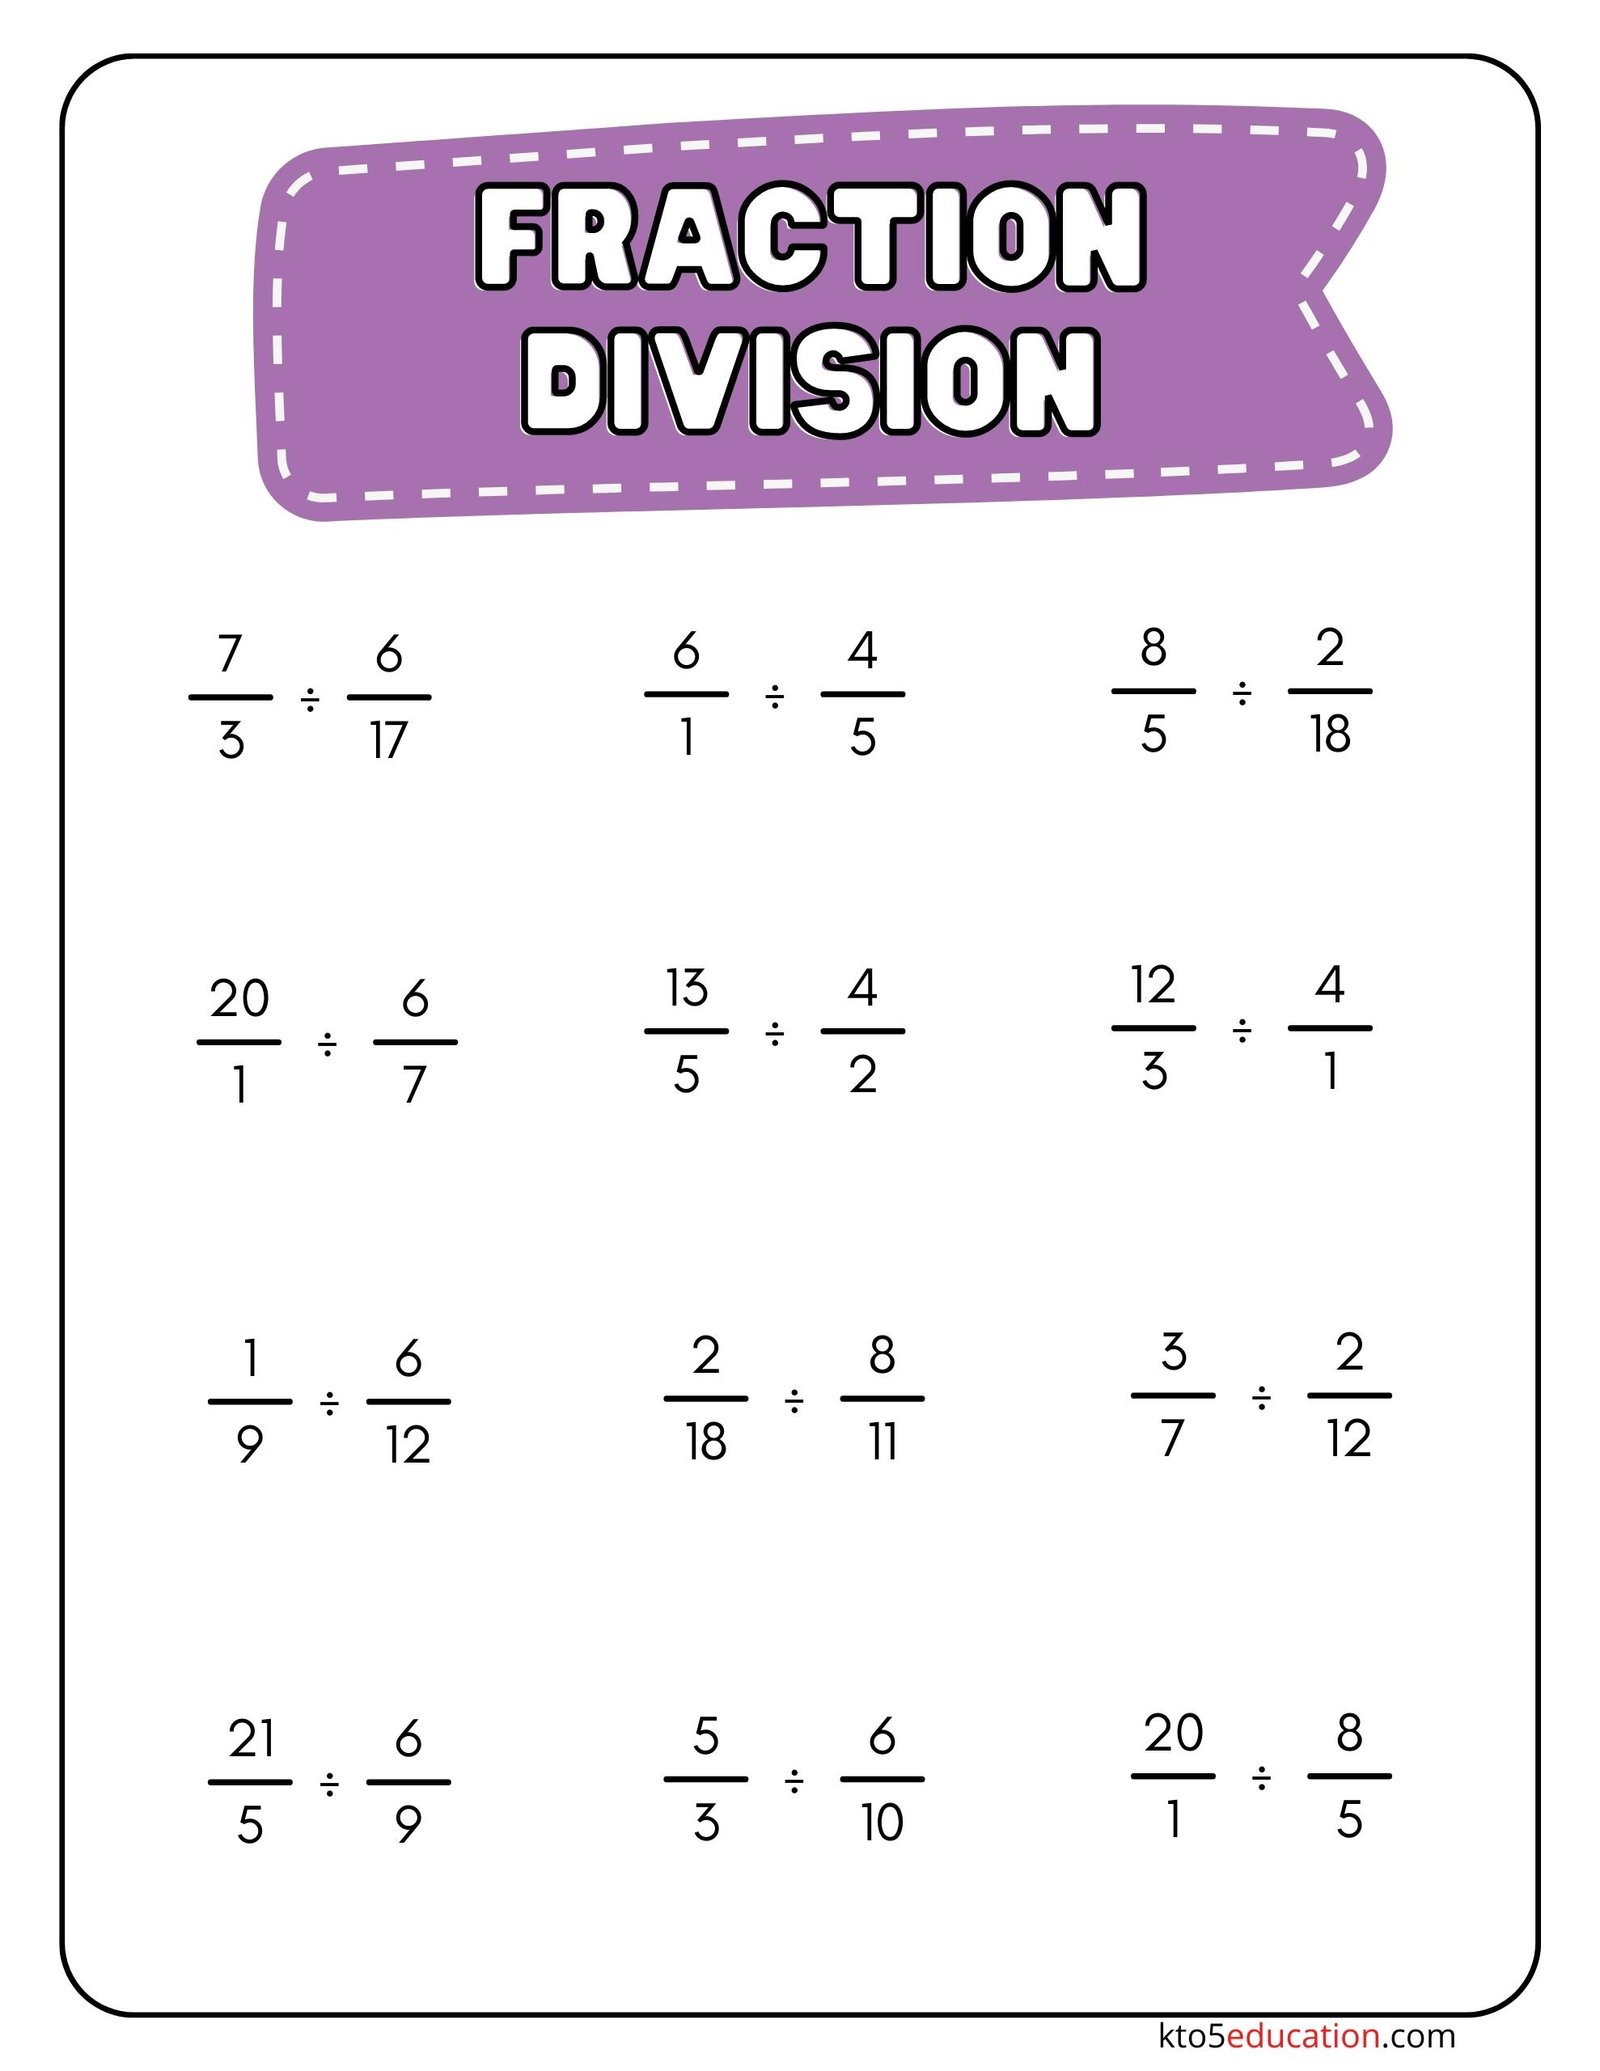 Fractions As Division Worksheets